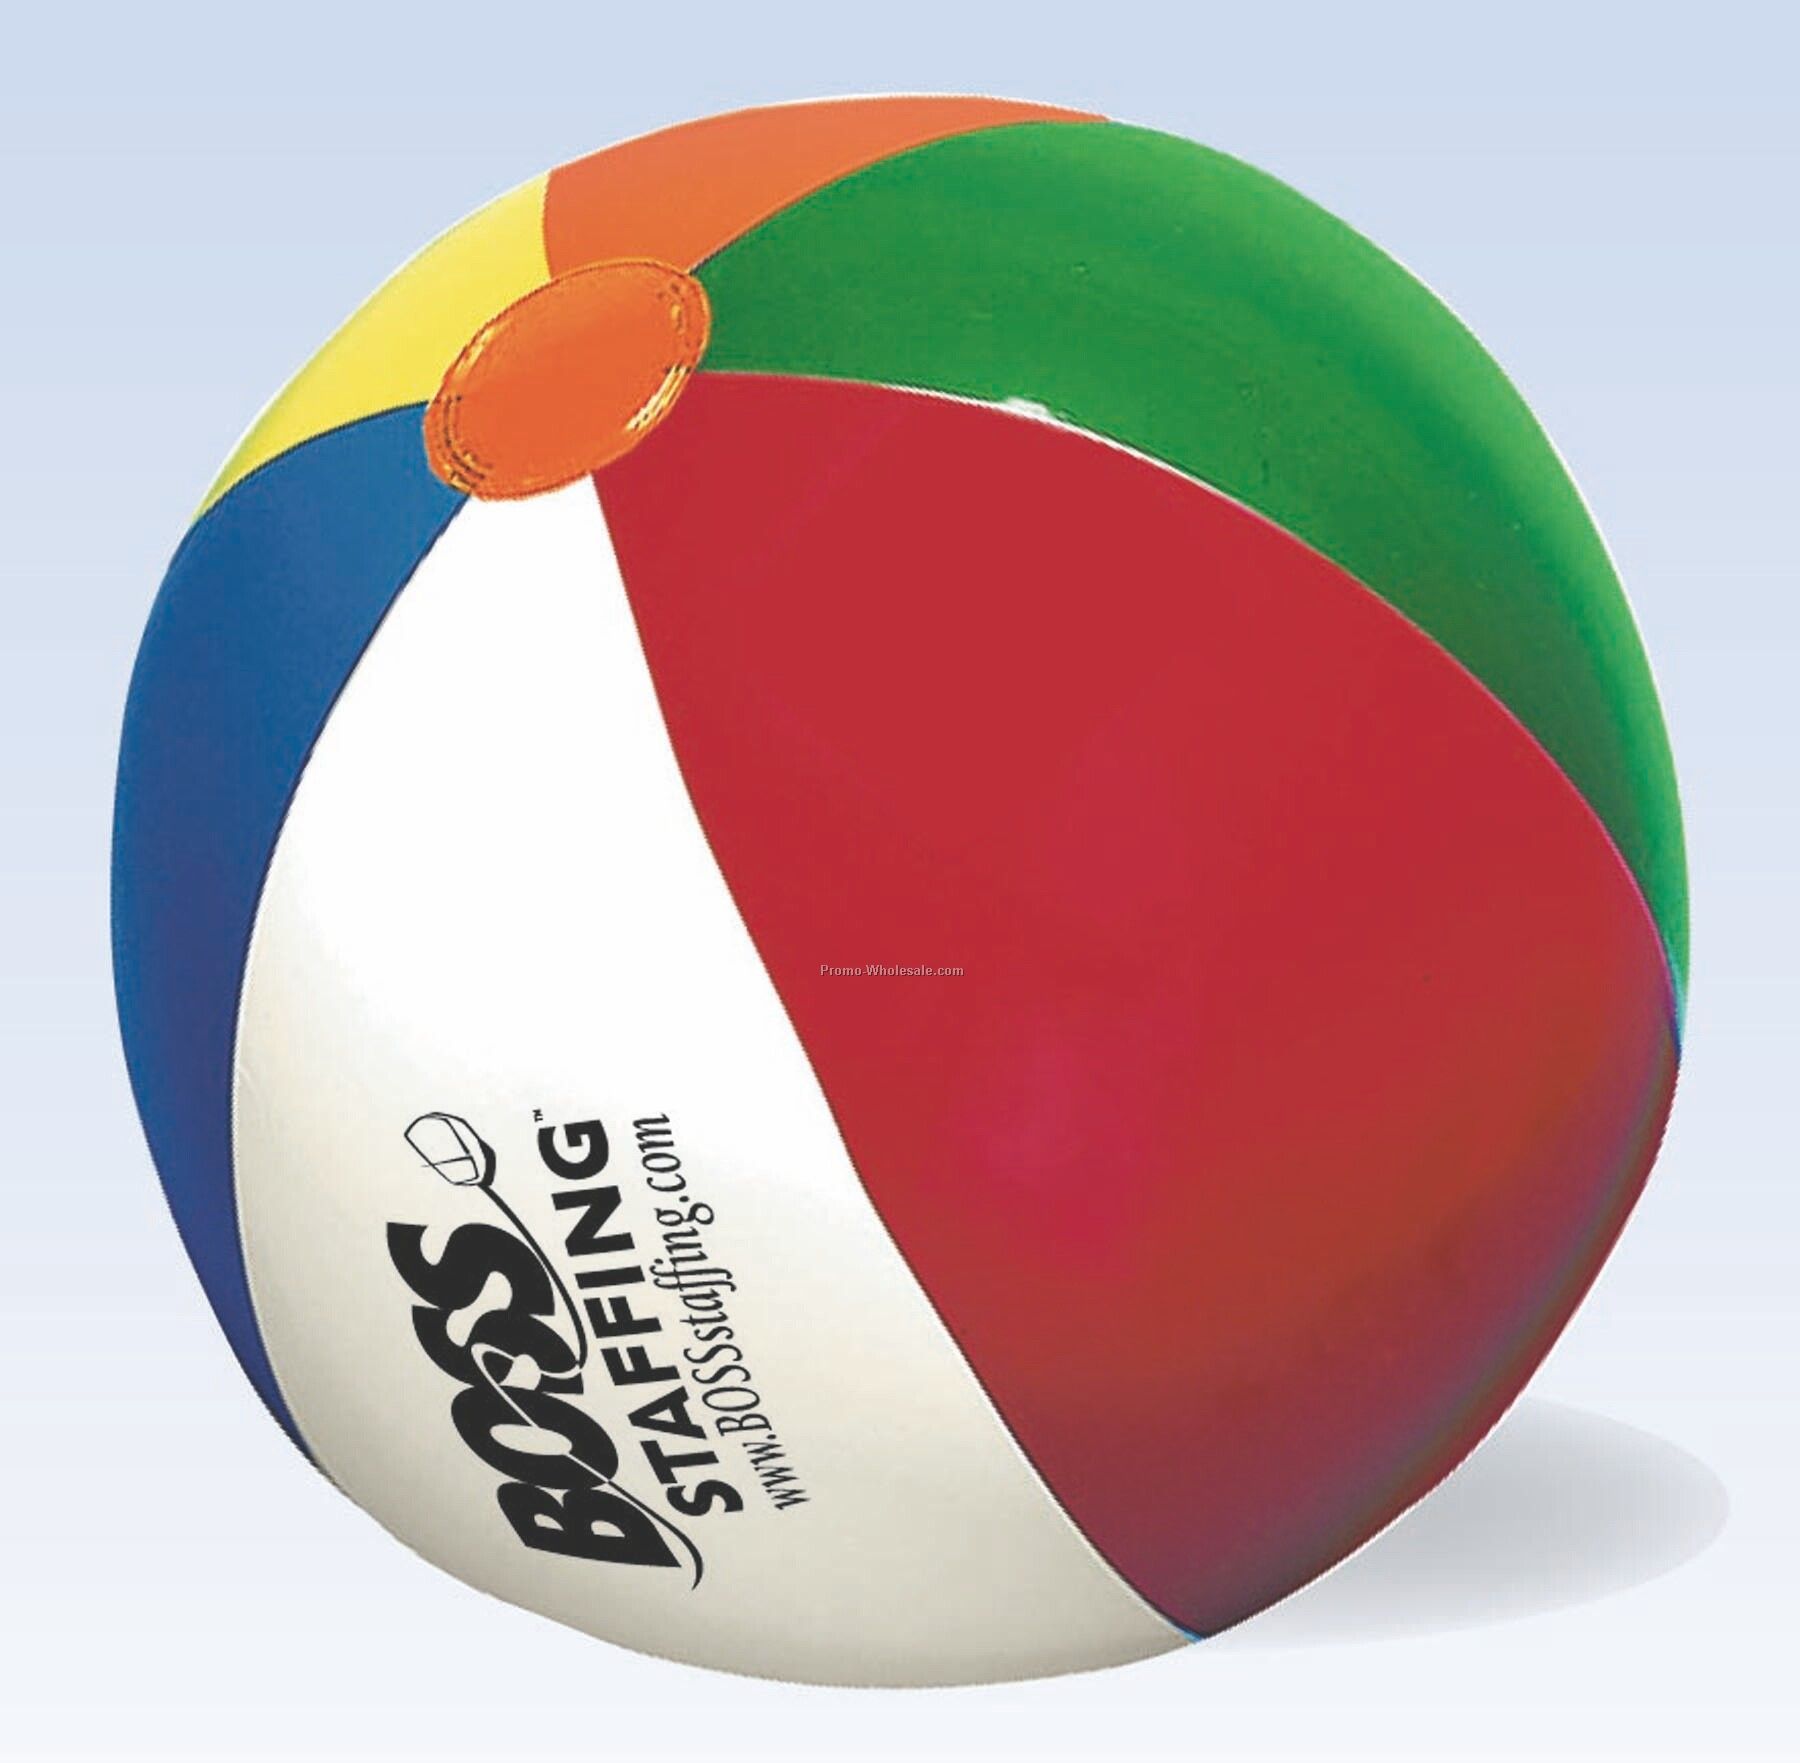 16" Beach Ball With Multi-colored Panels